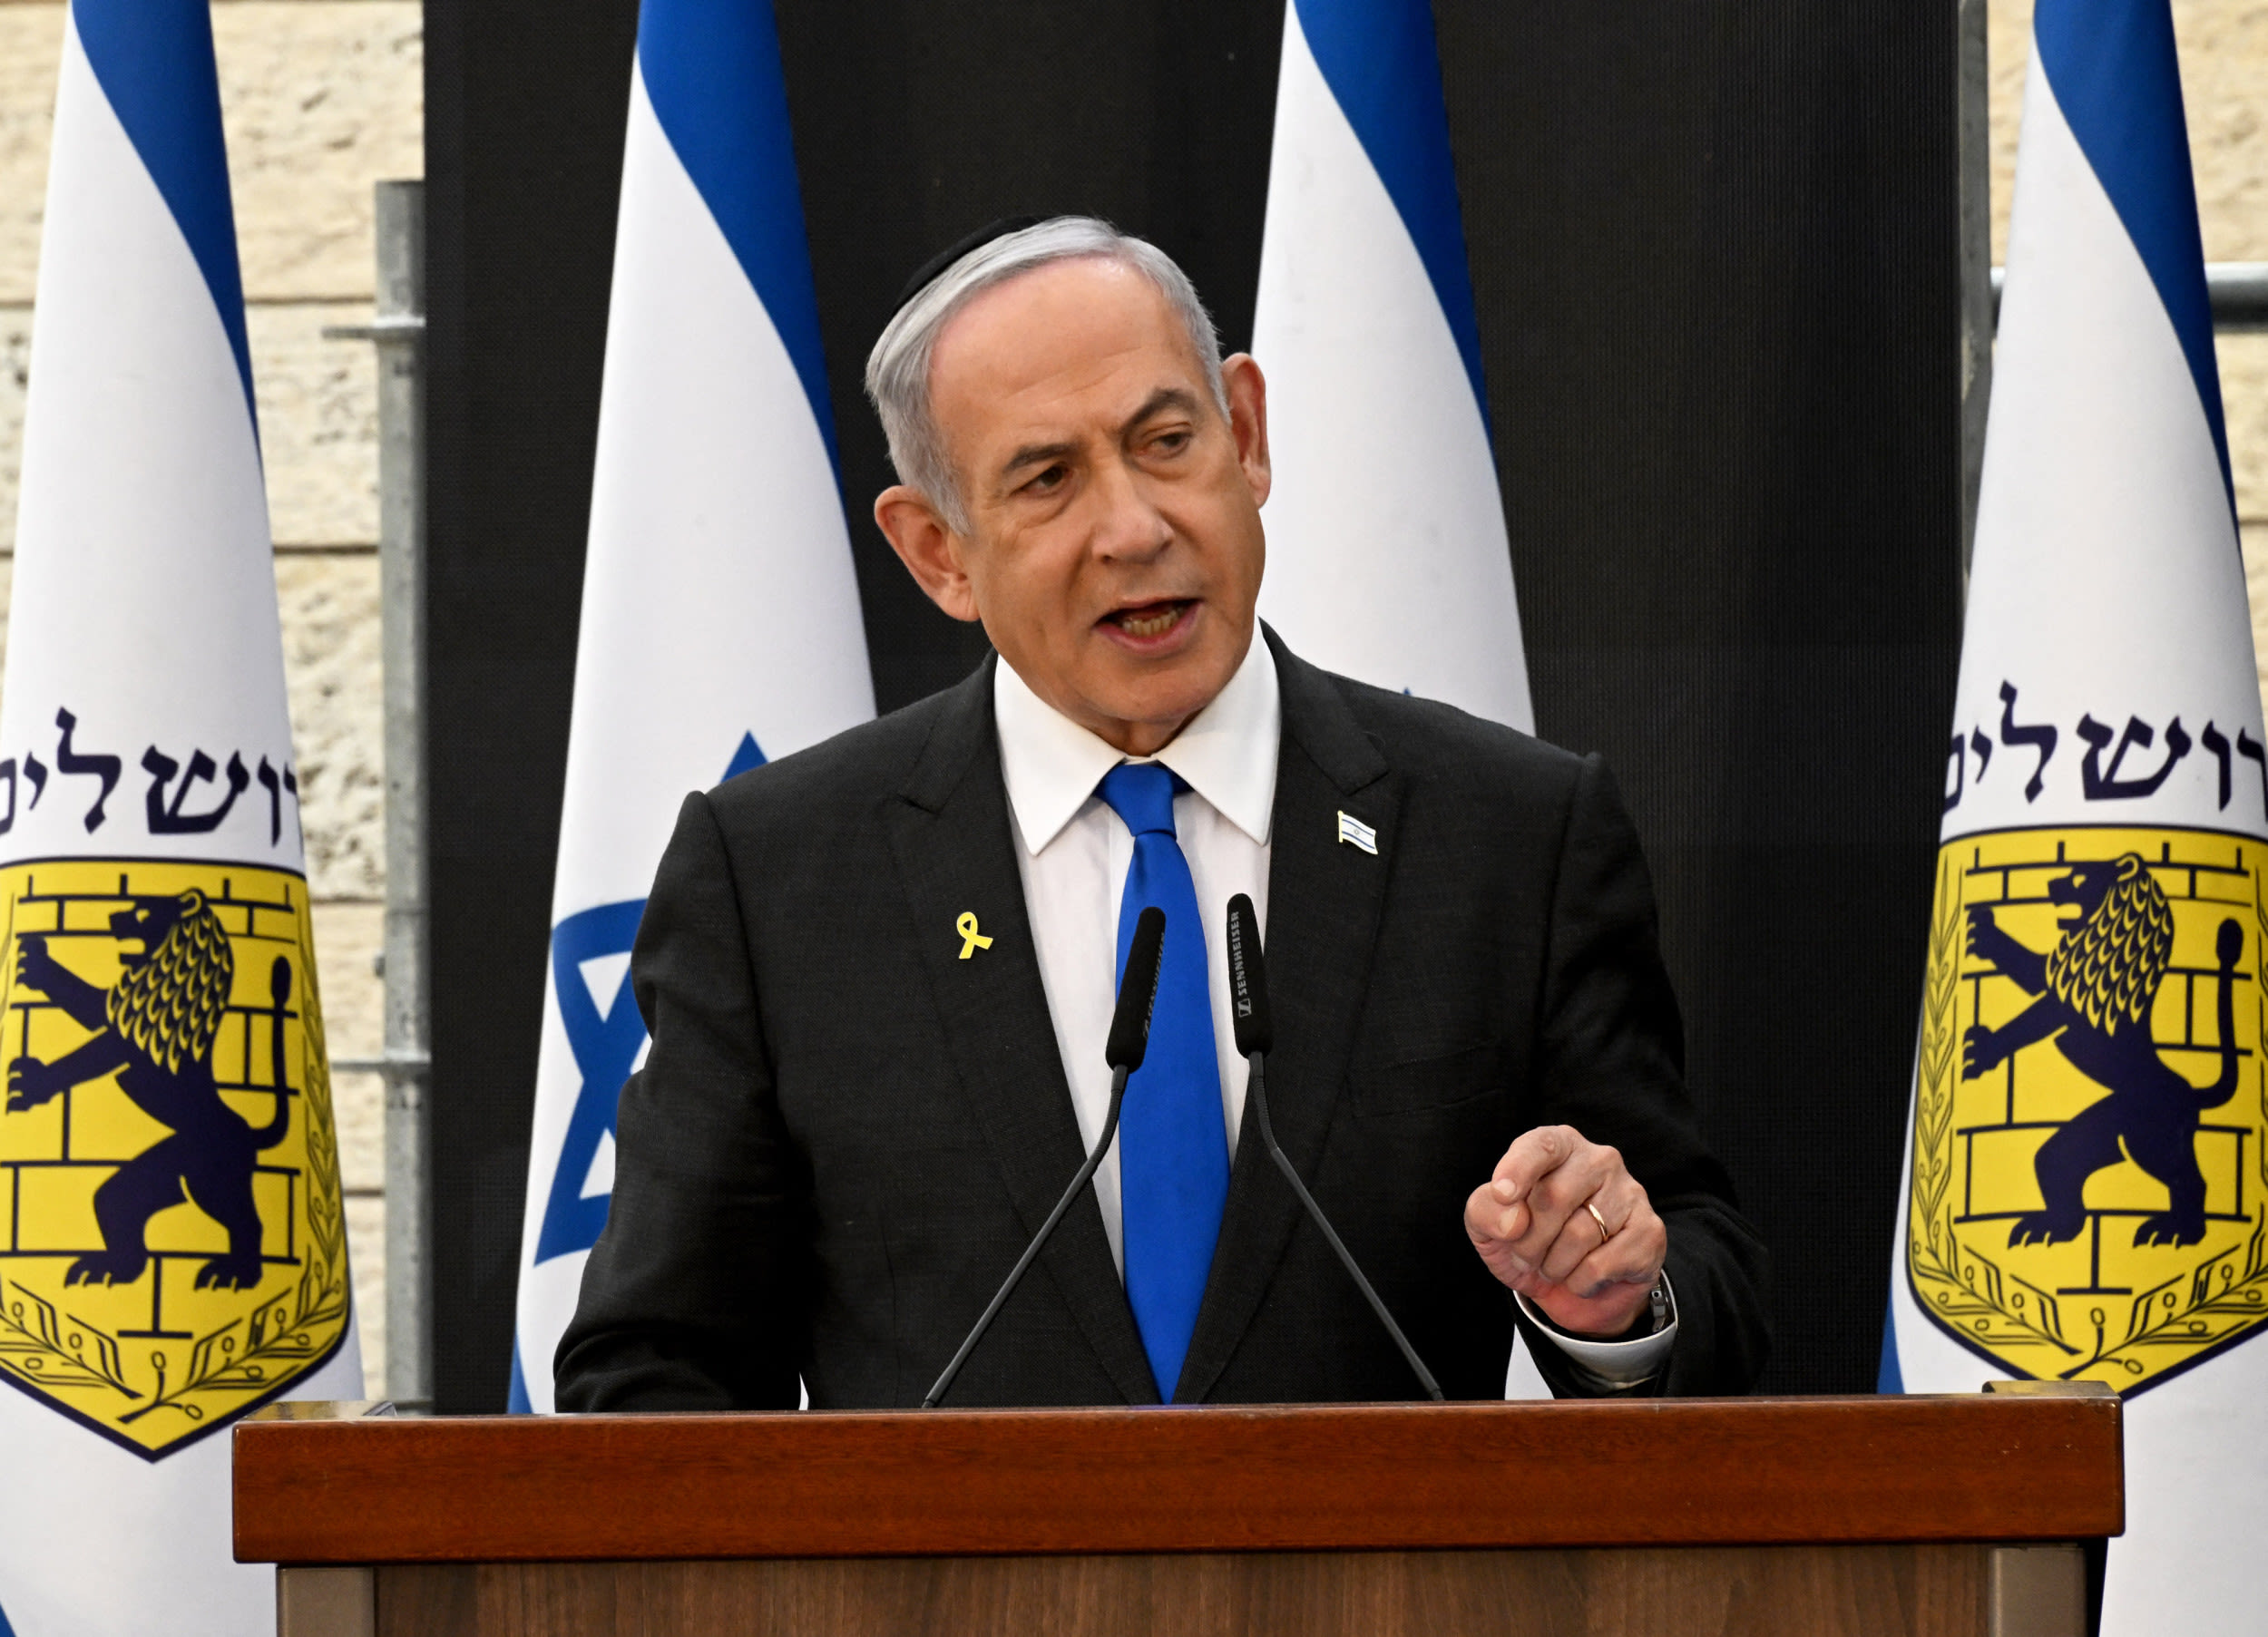 Netanyahu's warning to US leaders: 'You're next'